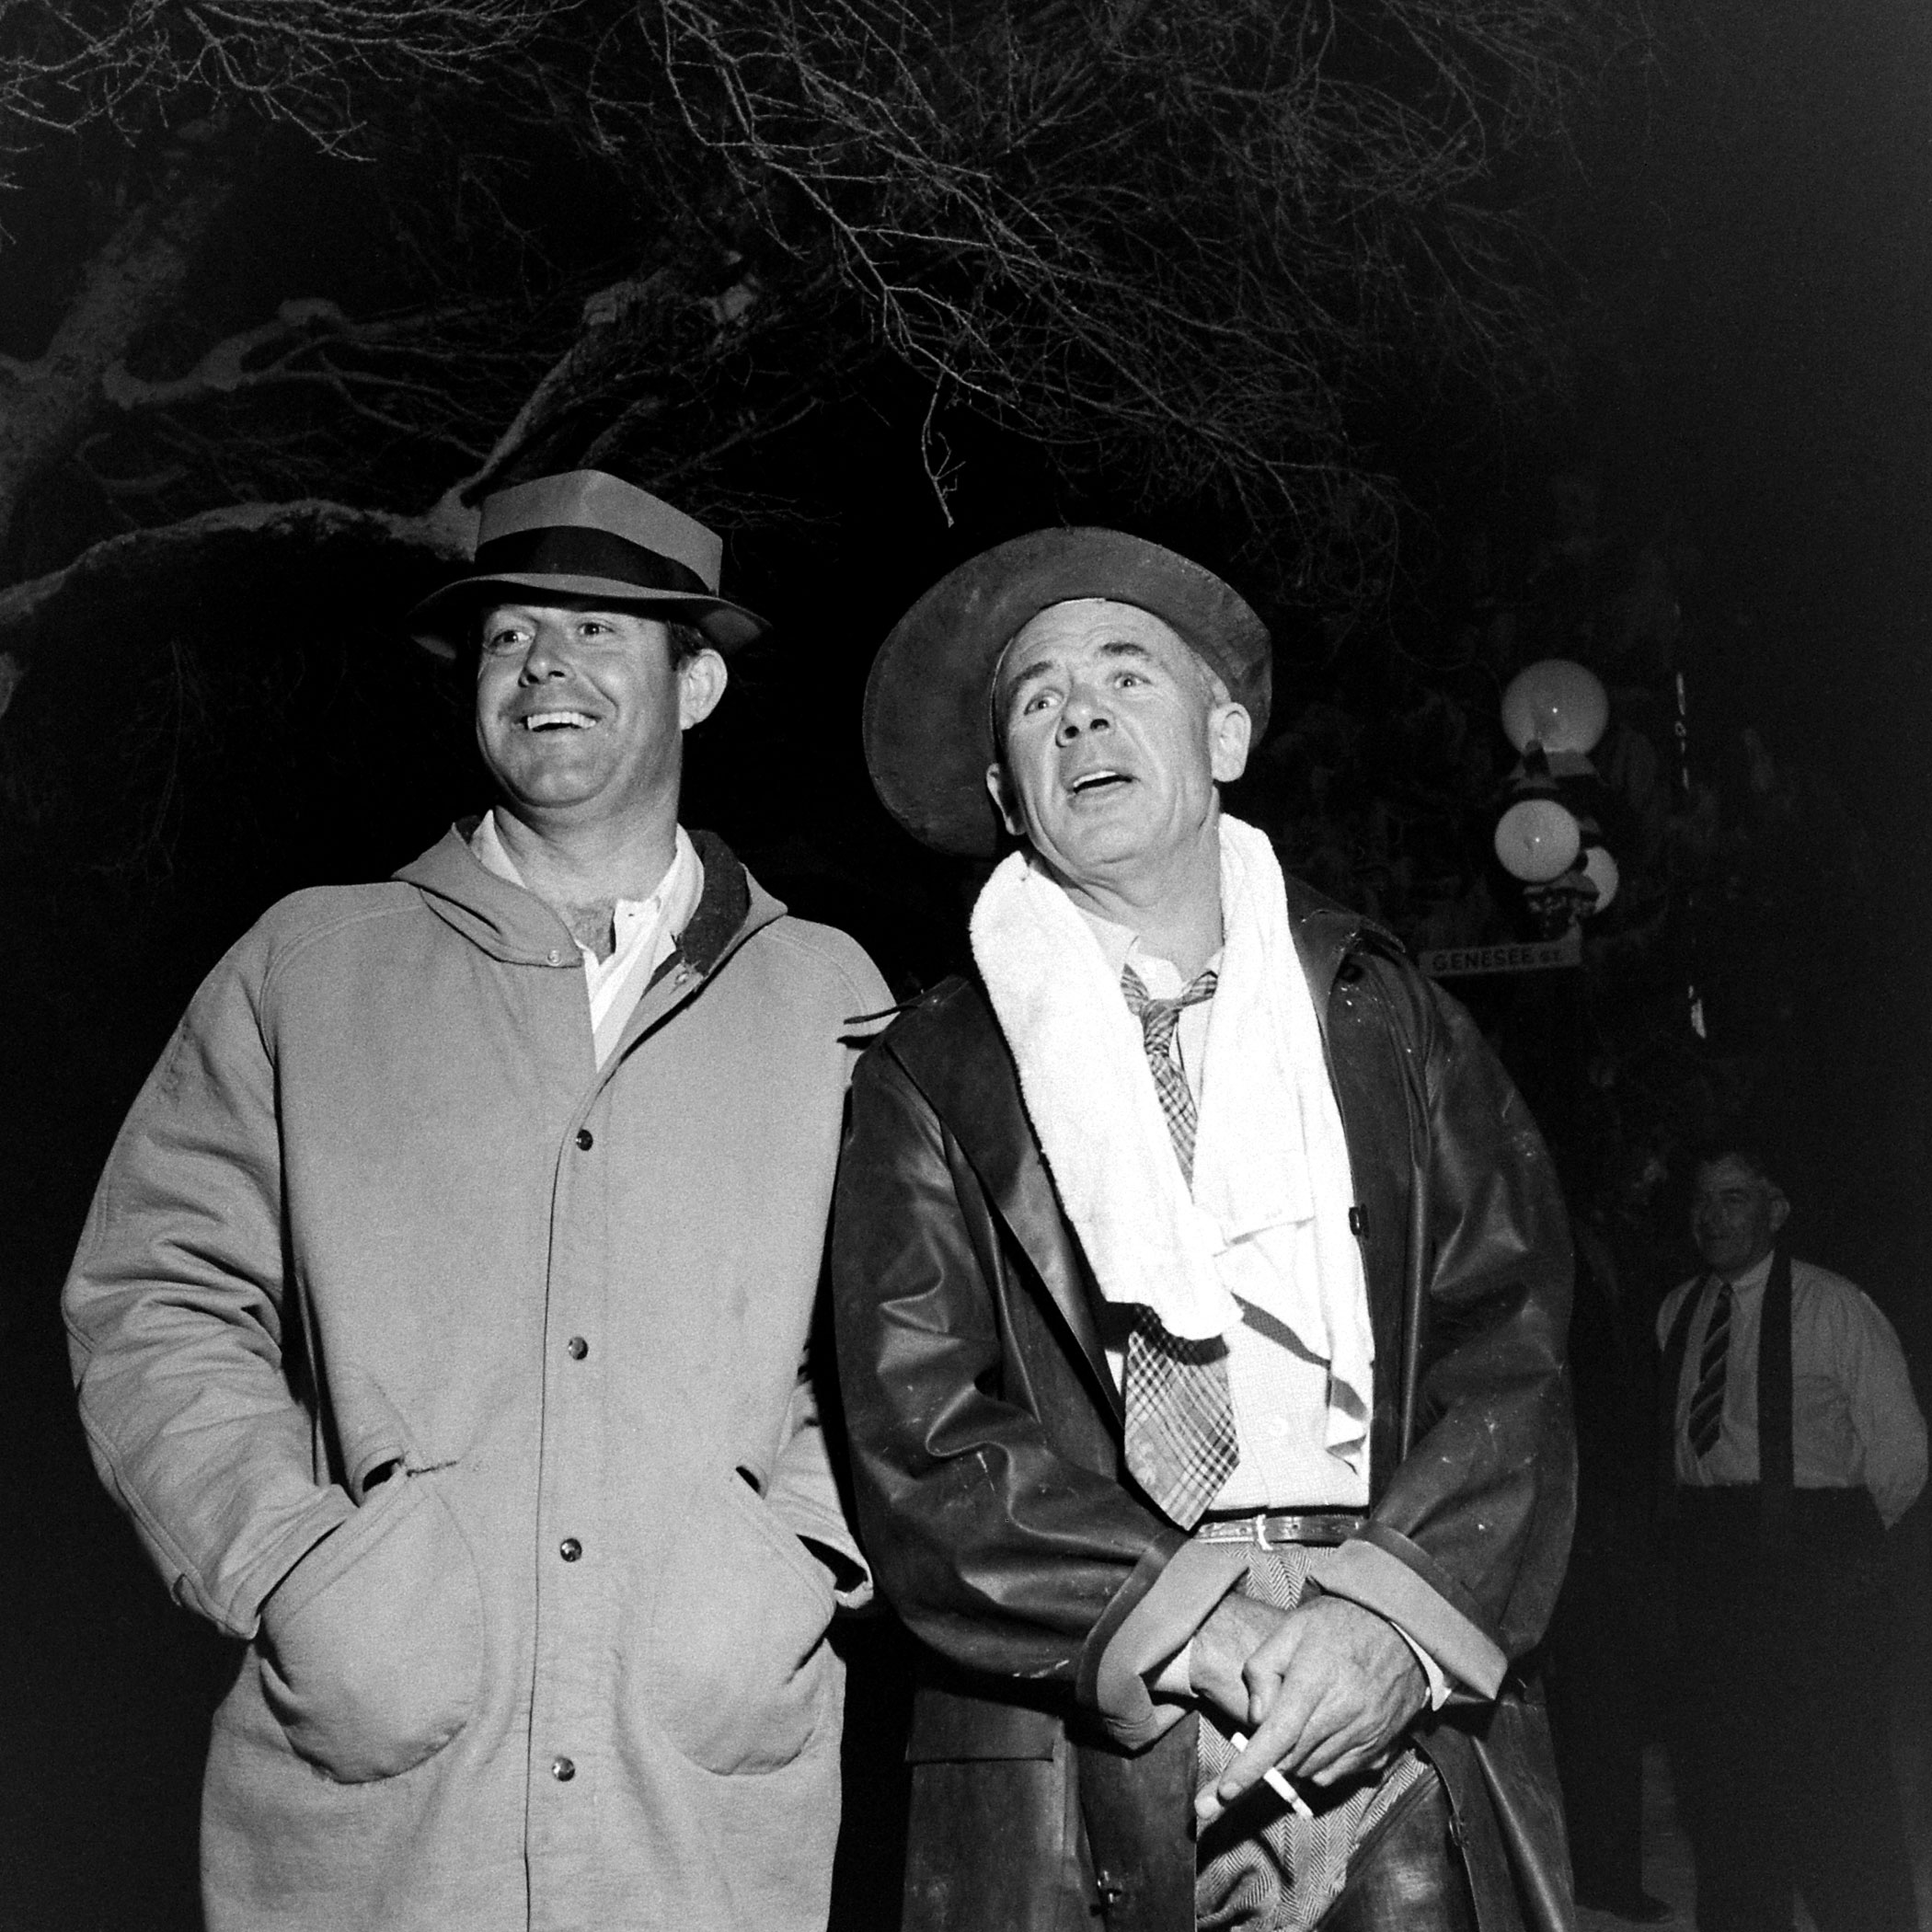 Director Frank Capra (right, with unidentified man) on the set of 'It's a Wonderful Life.'